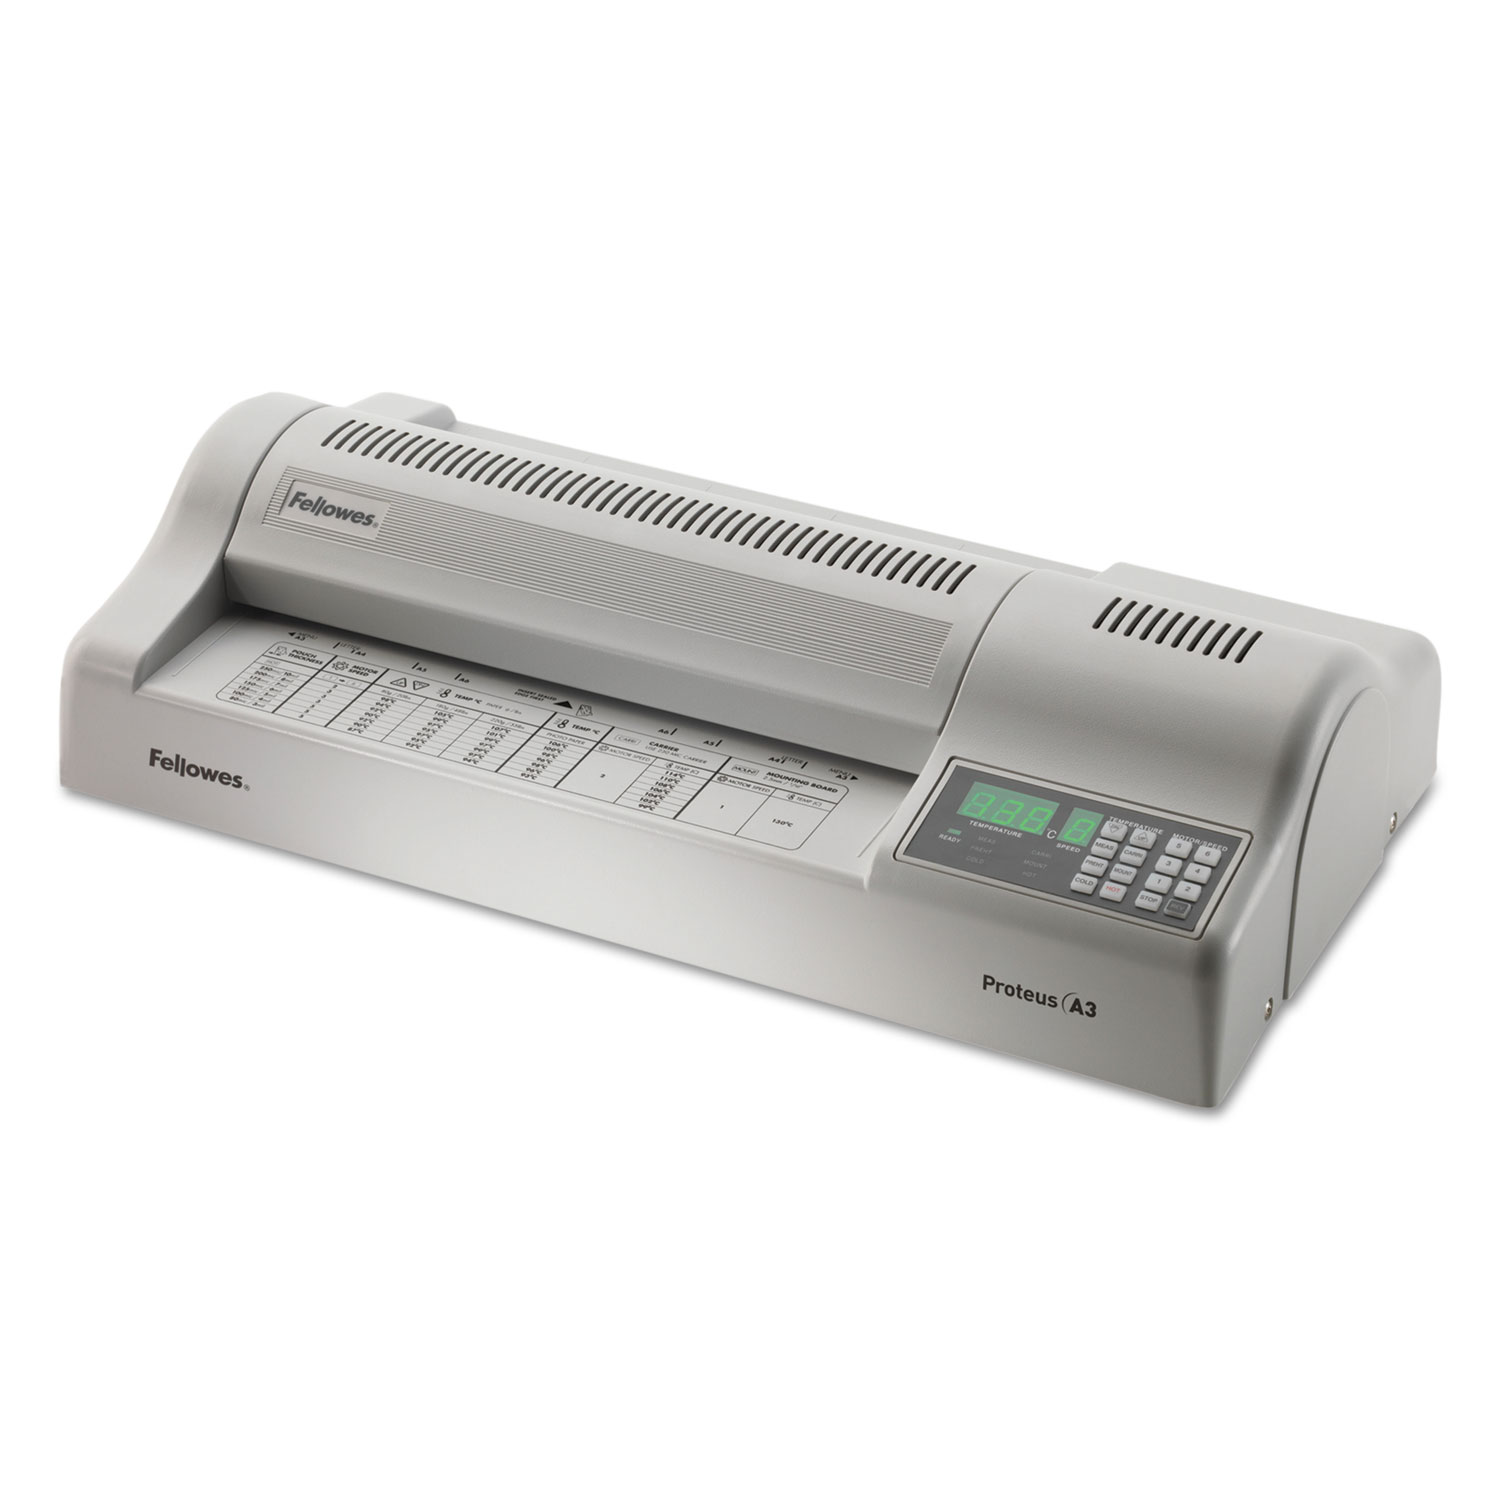 Proteus 125 Laminator, 12 Wide x 10mil Max Thickness